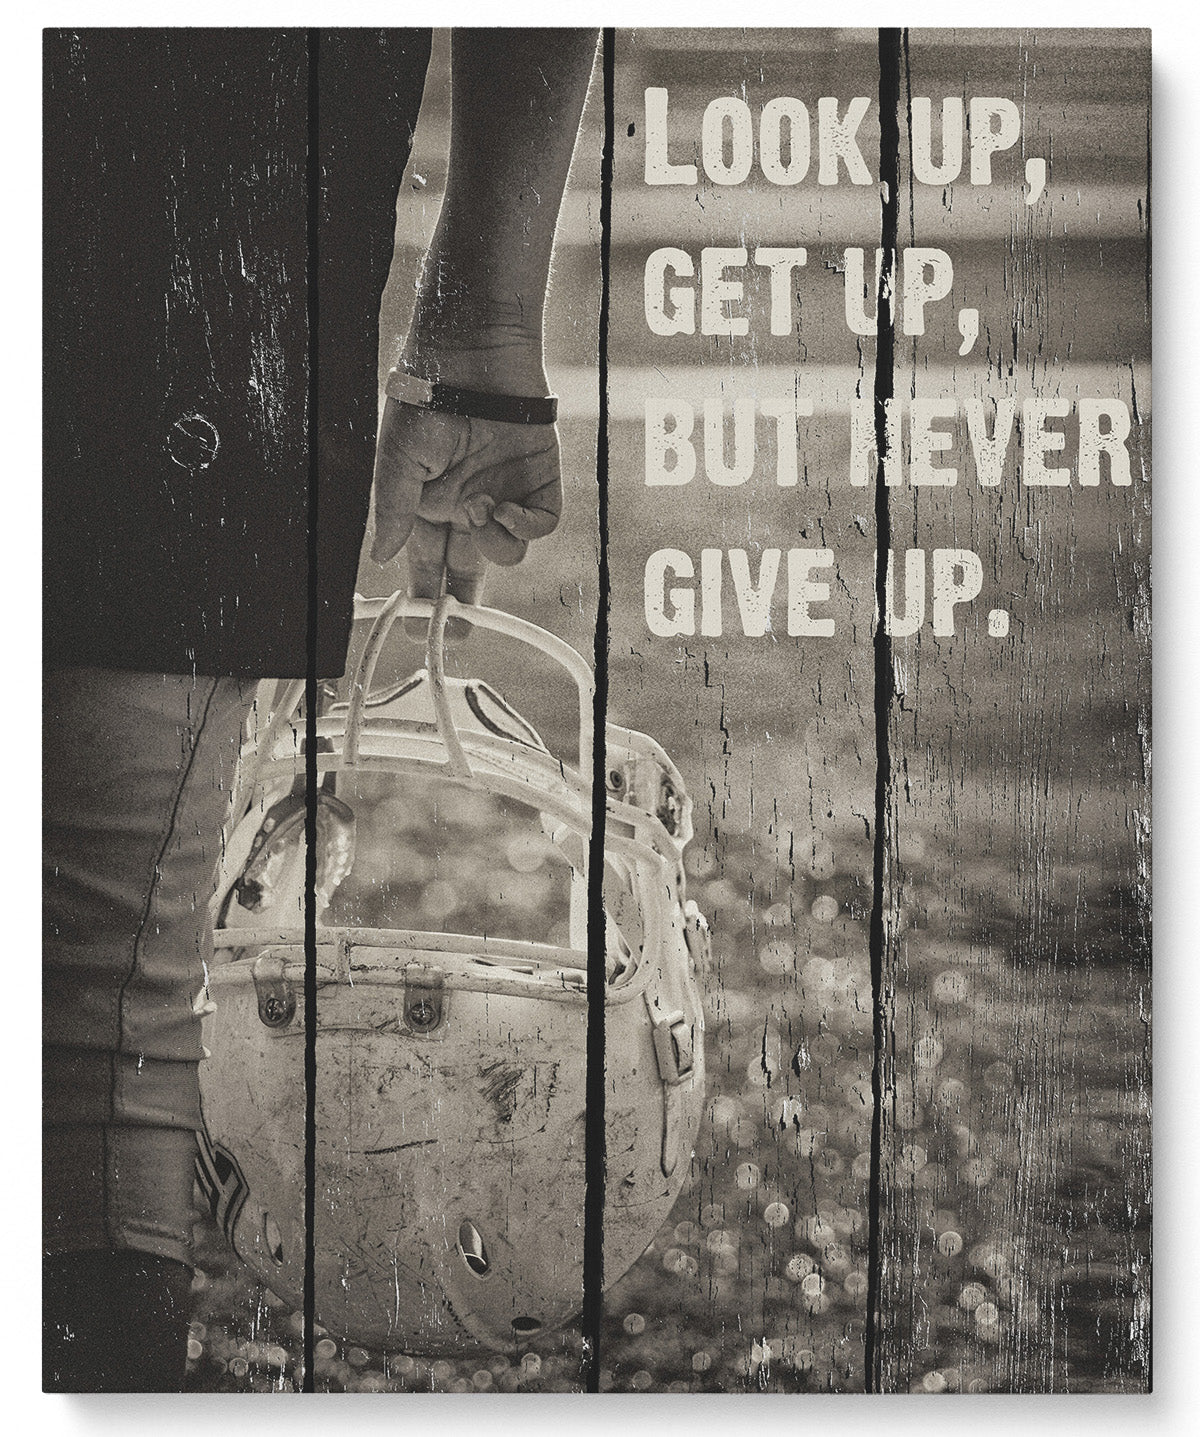 Look Up, Get Up, But Never Give Up - Football Wall Art Decor